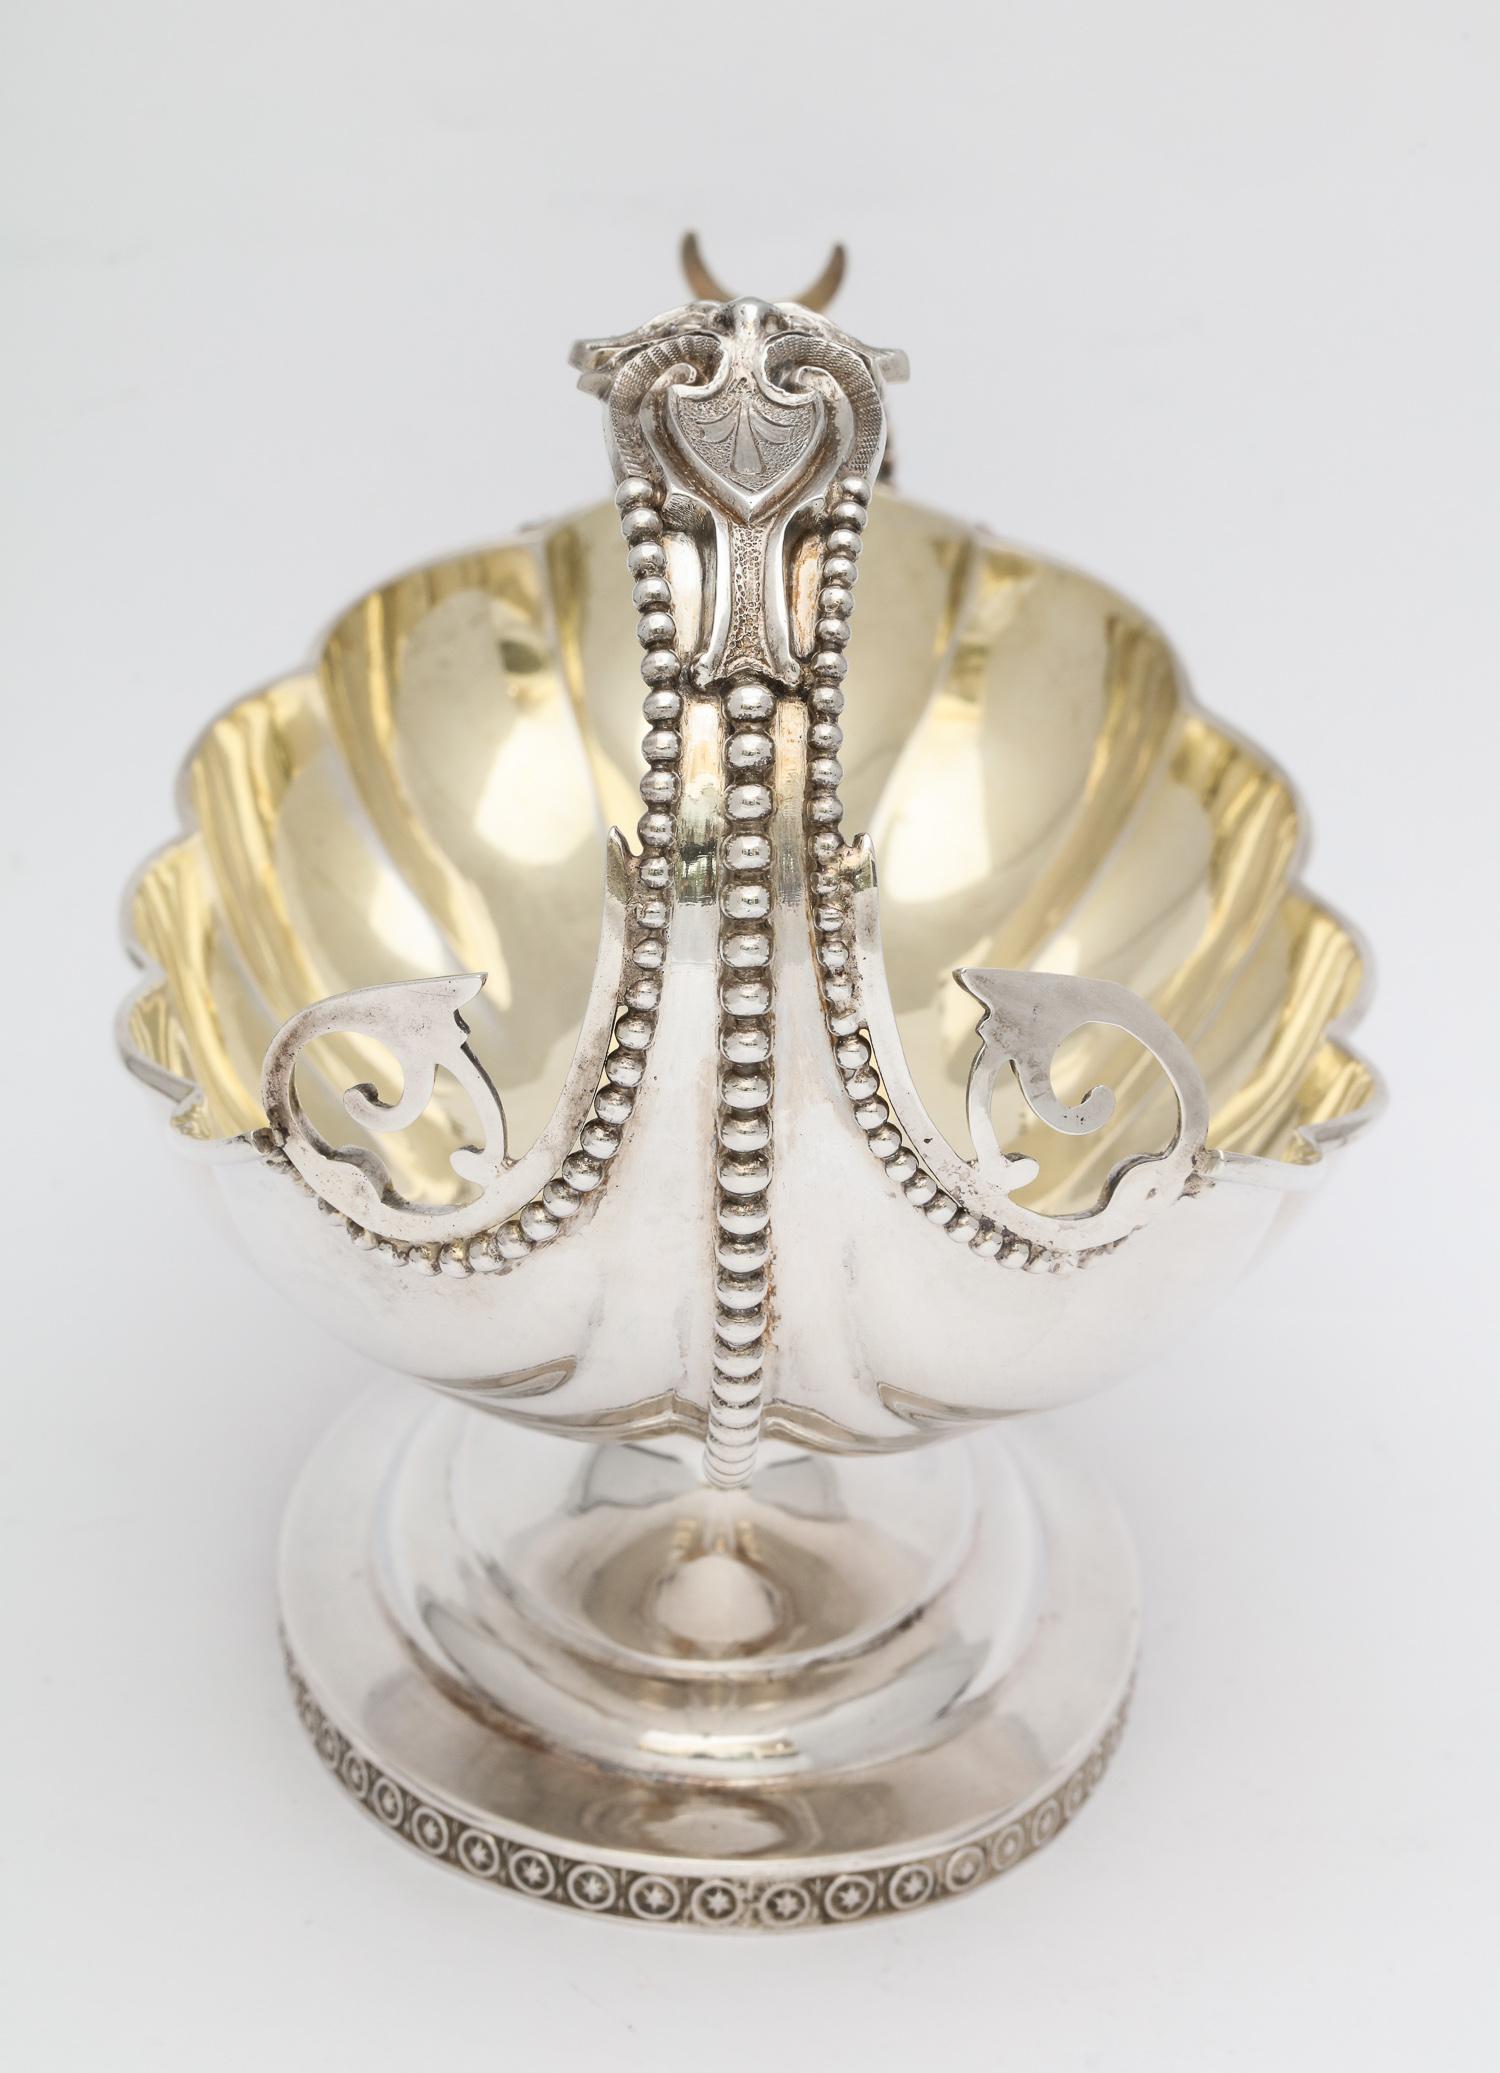 Neoclassical Sterling Silver Pedestal Based Sauce/Gravy Boat by Wood and Hughes In Good Condition For Sale In New York, NY